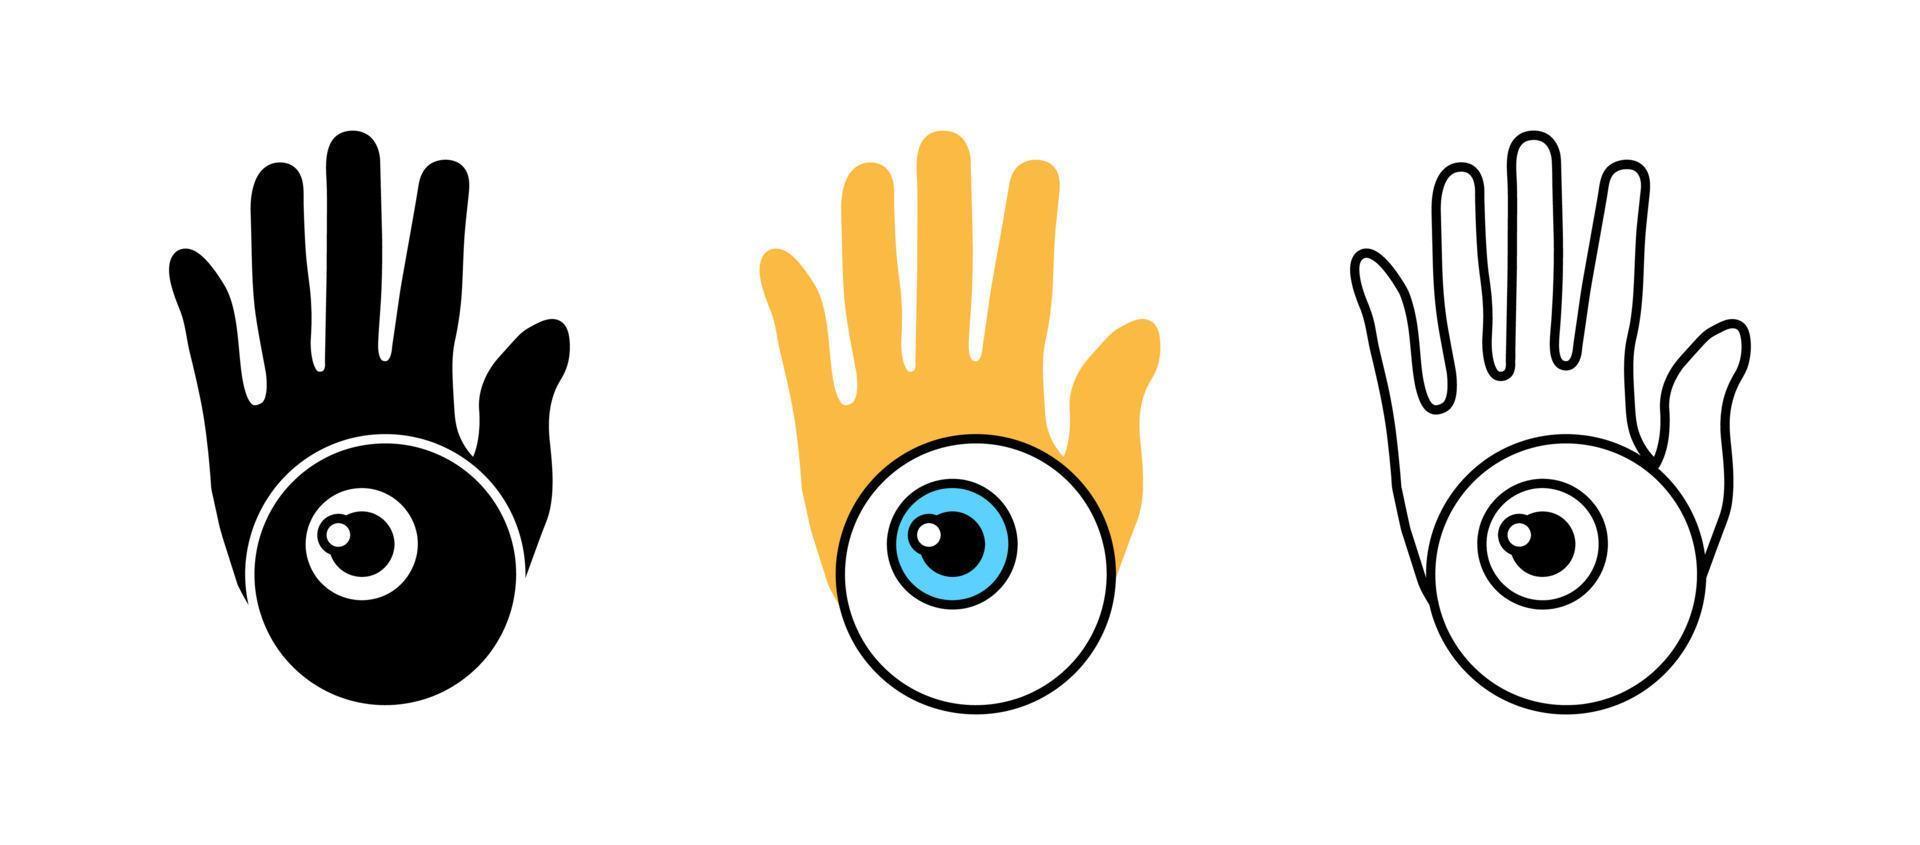 Human eye shape card in palm. Present palmistry shape sign vector icon set. Silhouette, colored, linear icon set. Logo-web, icon design element.